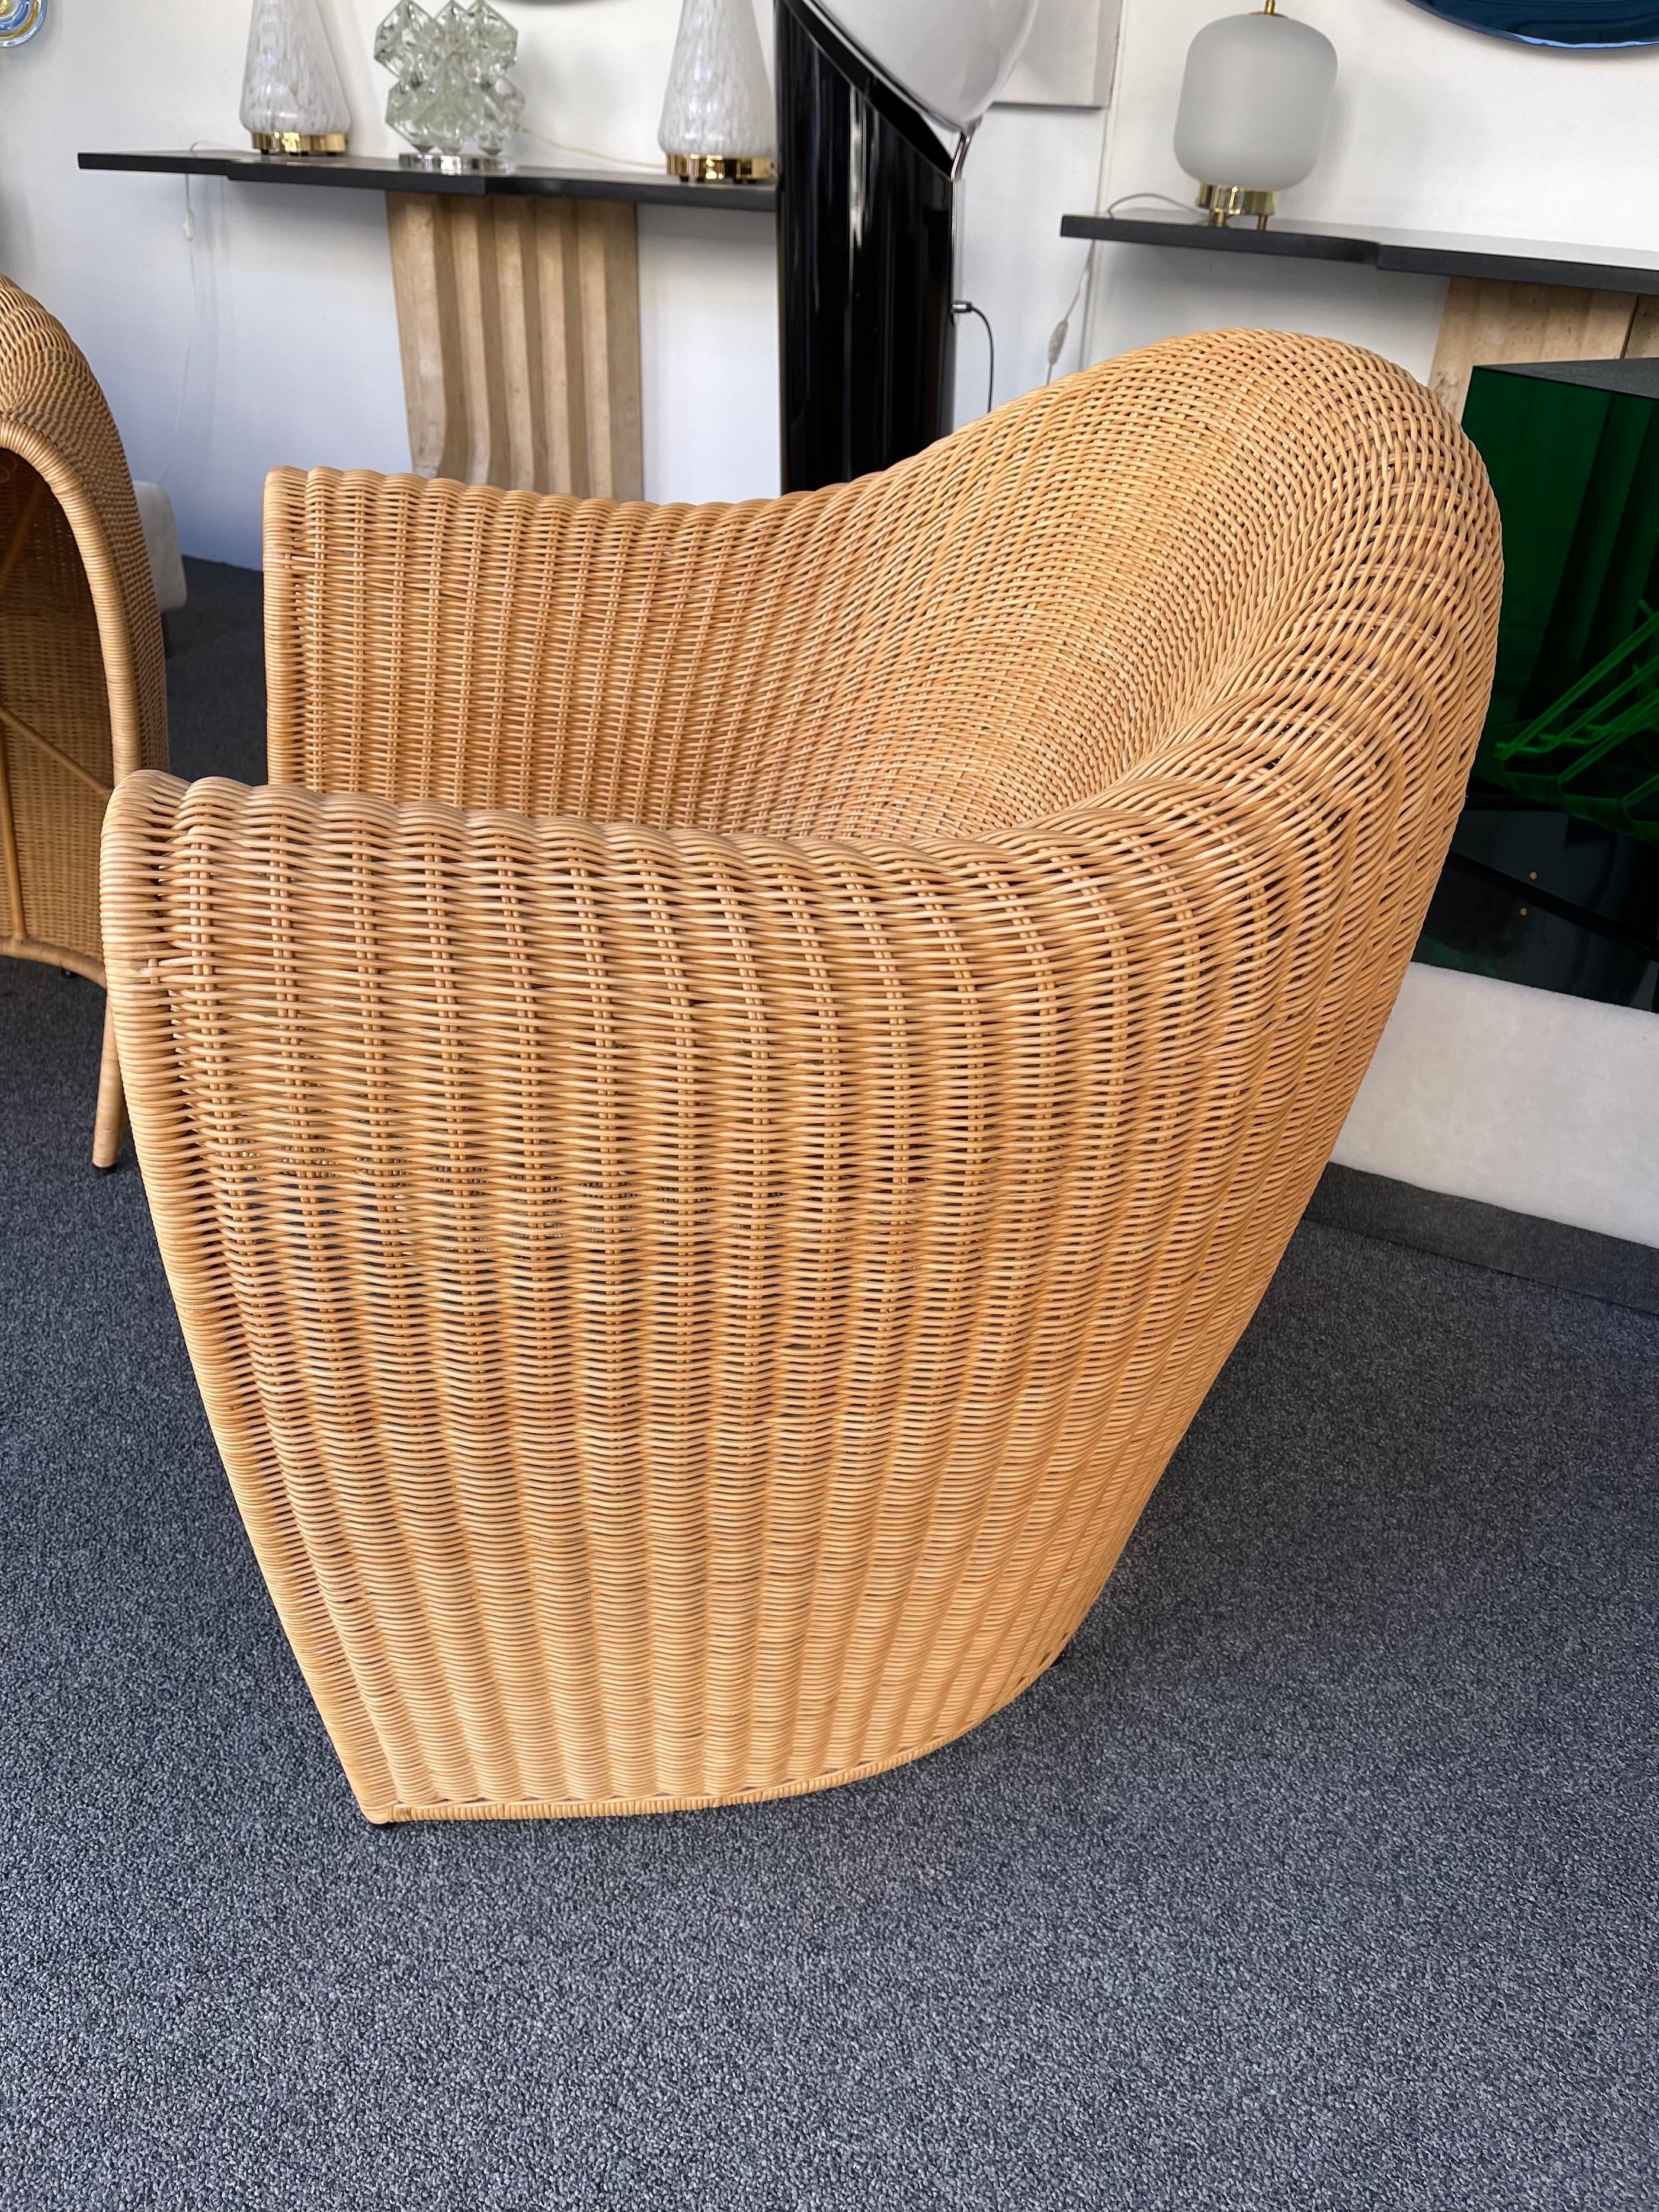 Pair of King Tubby Rattan Armchairs by Platt & Young for Driade, Italy, 1990s For Sale 2